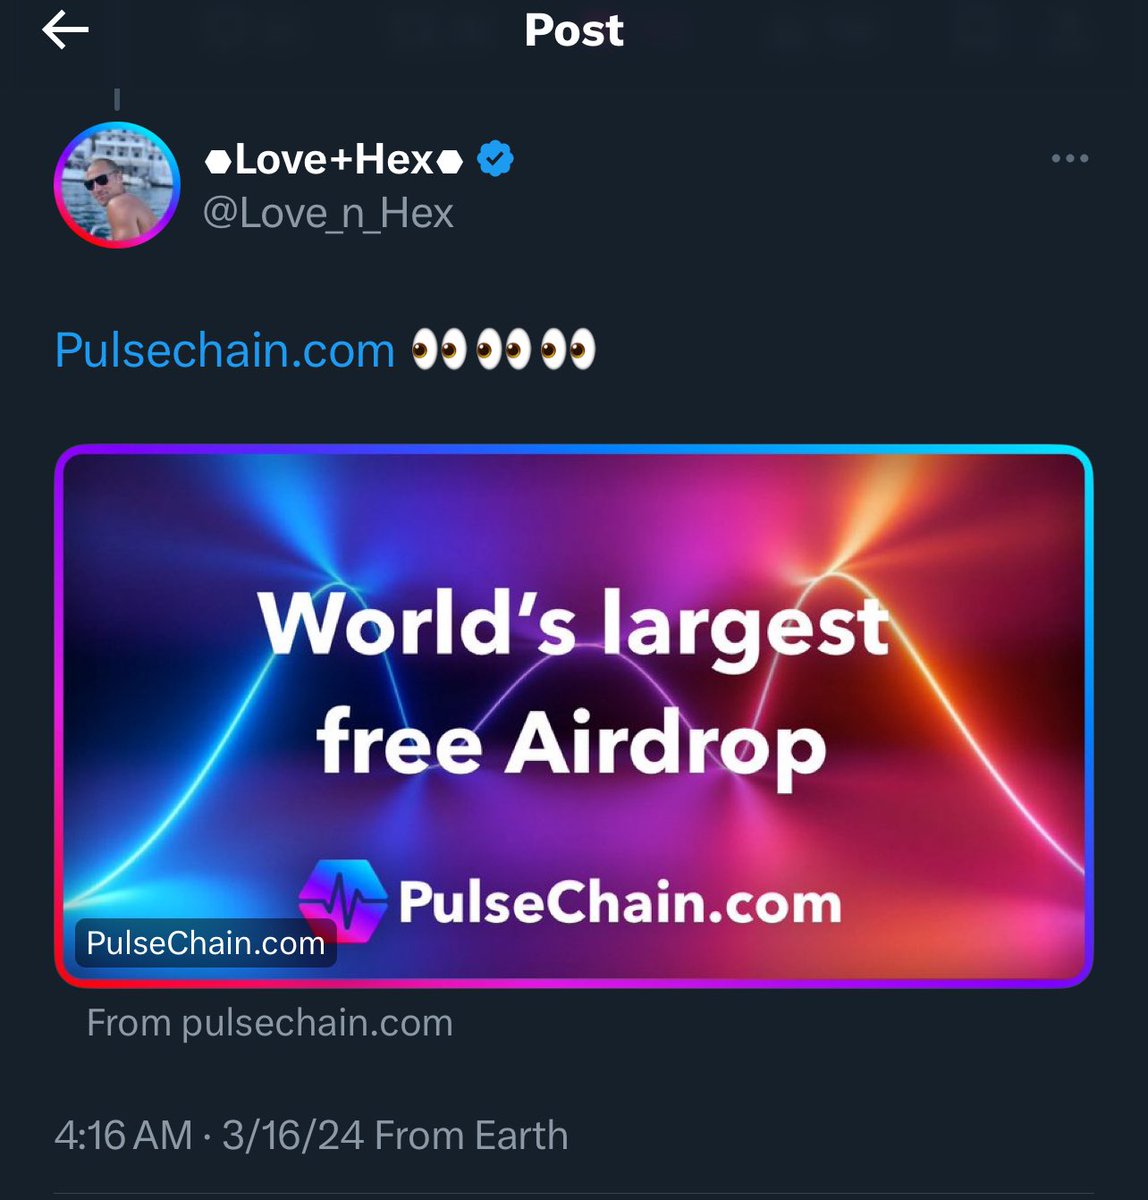 Approaching a year into #Pulsechain launch, “Worlds largest free airdrop” is still the catch phrase that appears when typing pulsechain dot com into an X post or reply. Pay attention to our PRC20s, many have been and will continue to perform spectacularly. $HEX $pDAI $pWBTC…